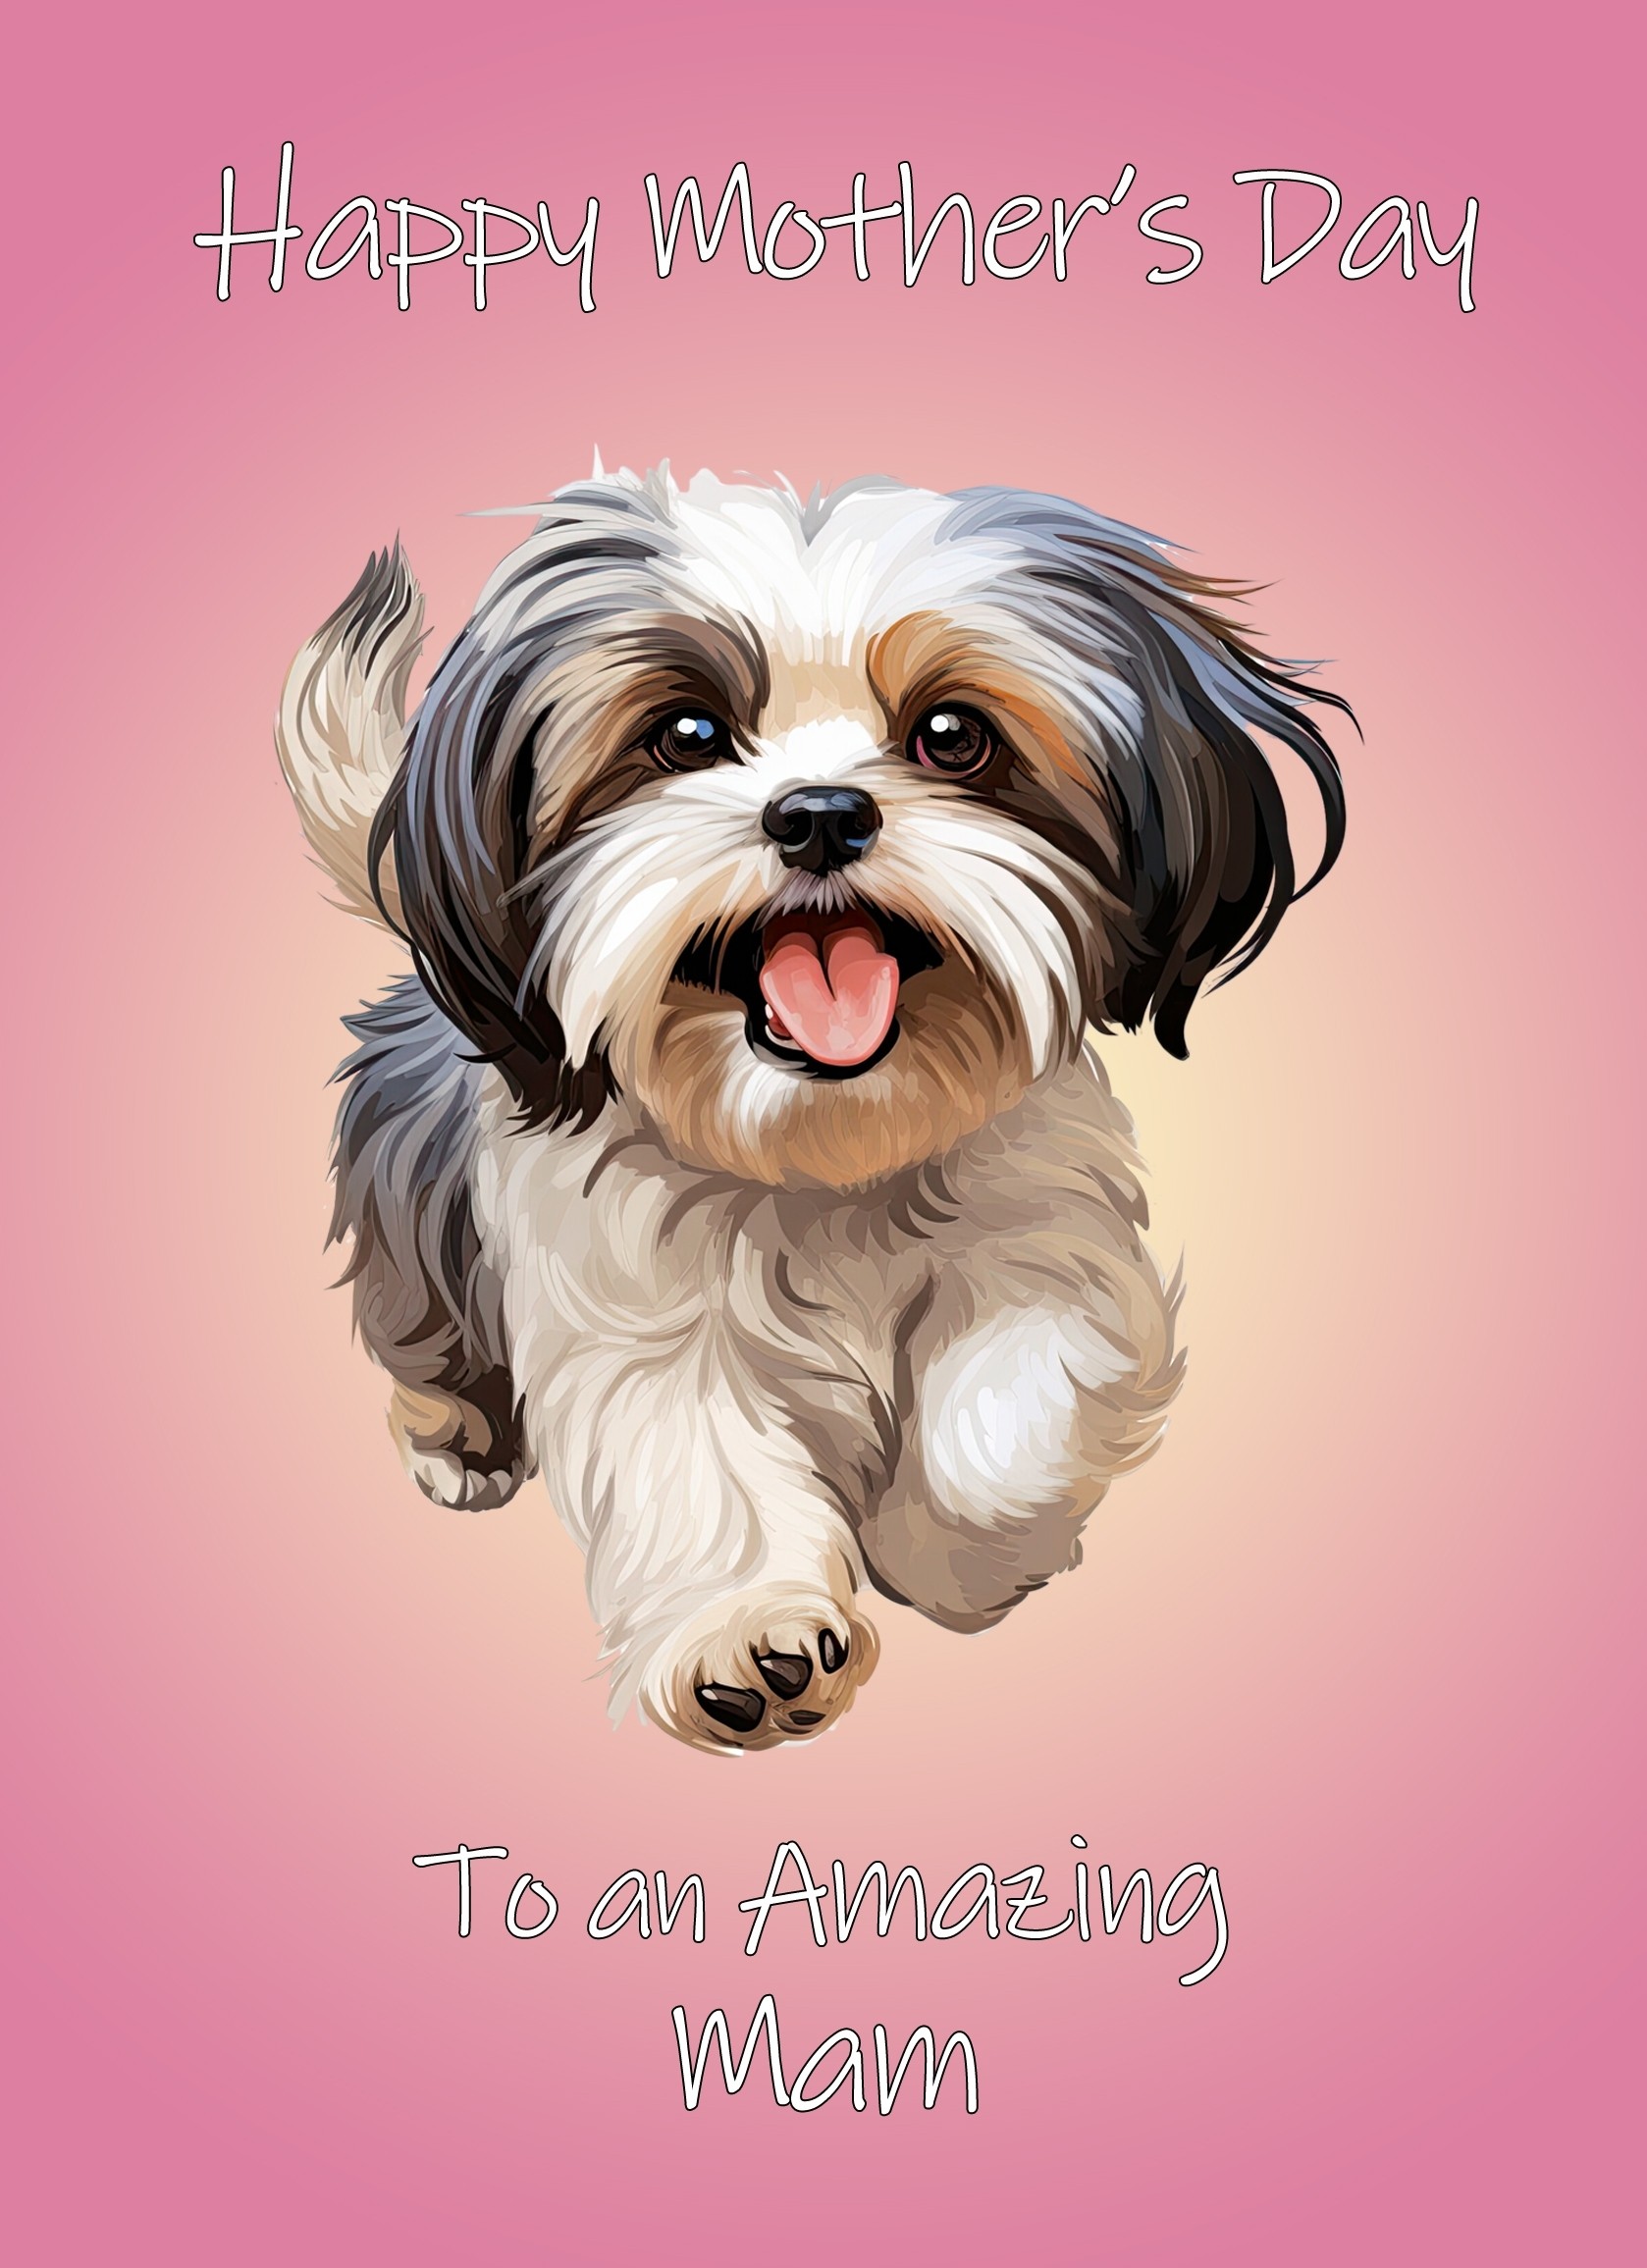 Shih Tzu Dog Mothers Day Card For Mam